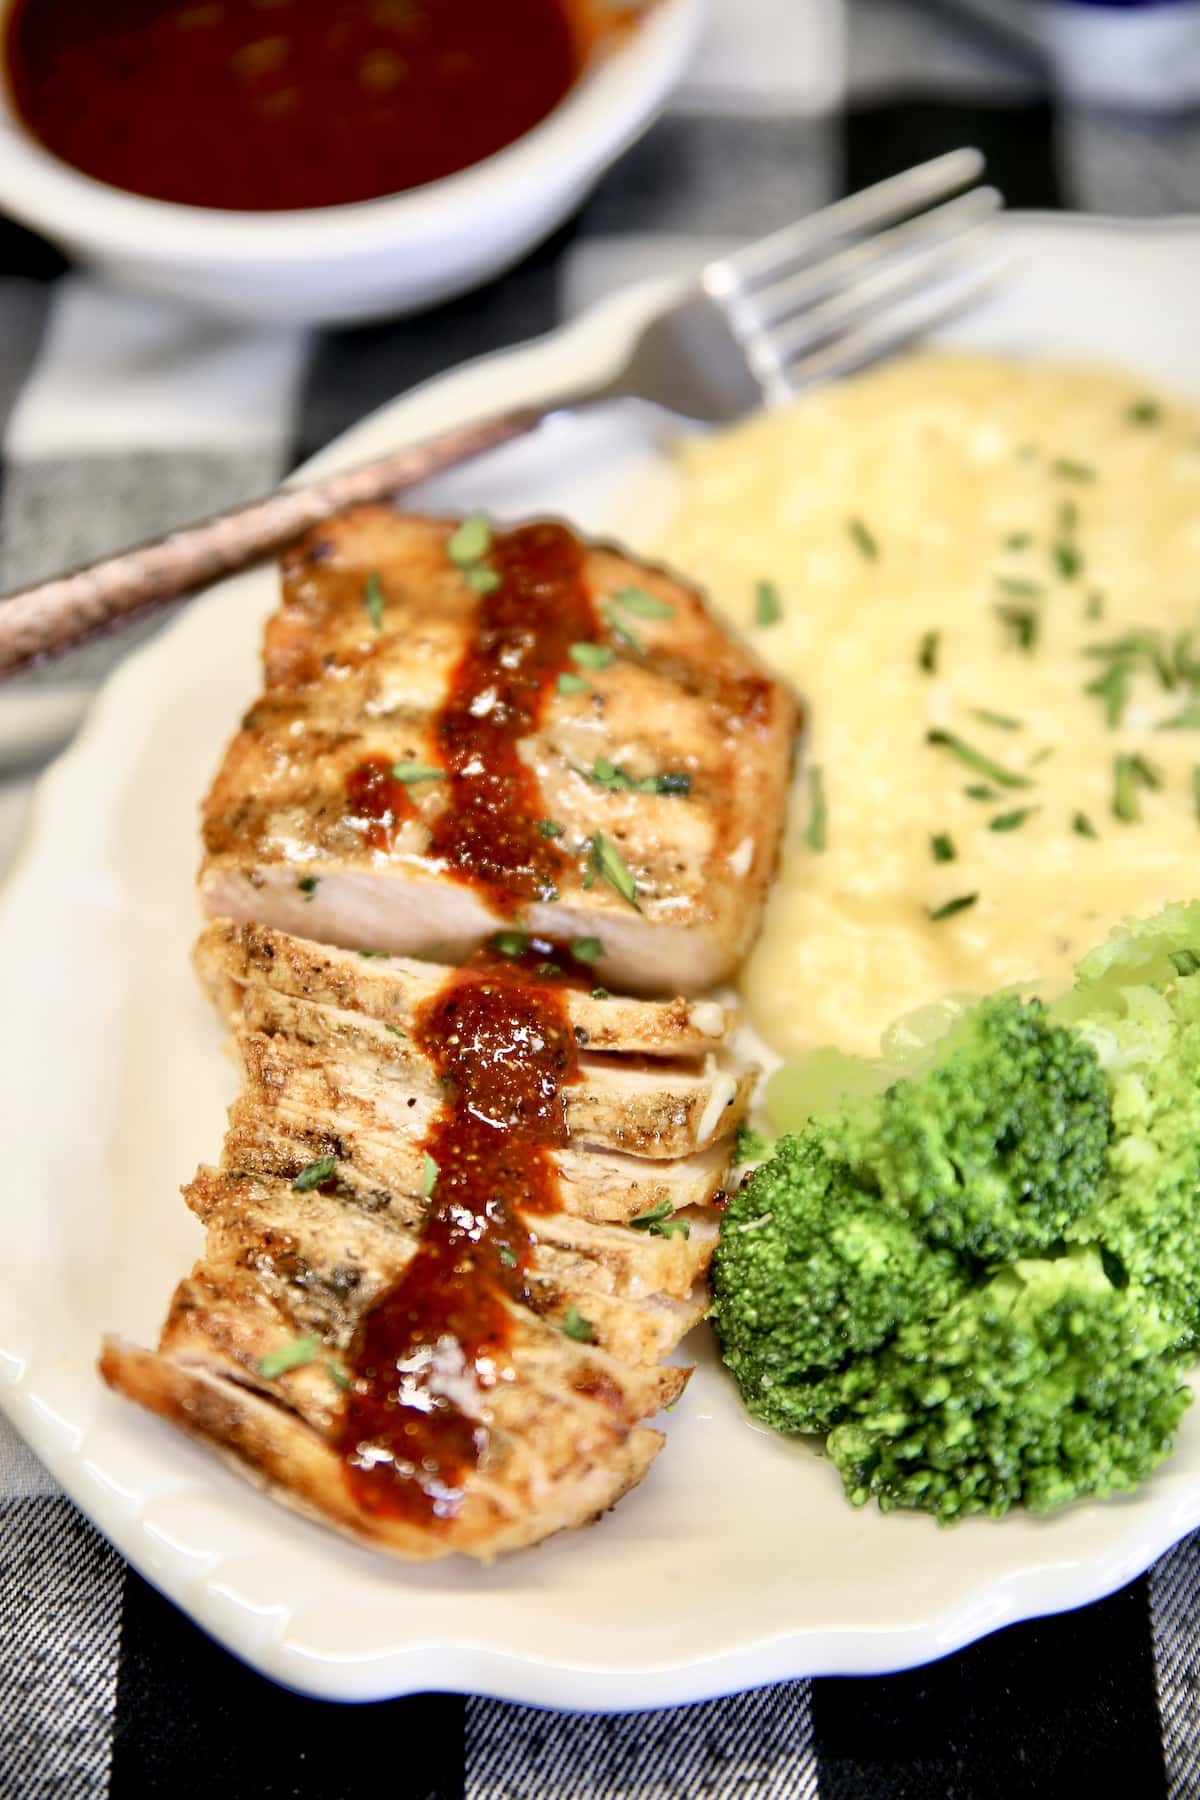 Plate with sliced pork chop drizzled with bbq sauce, broccoli and potatoes.